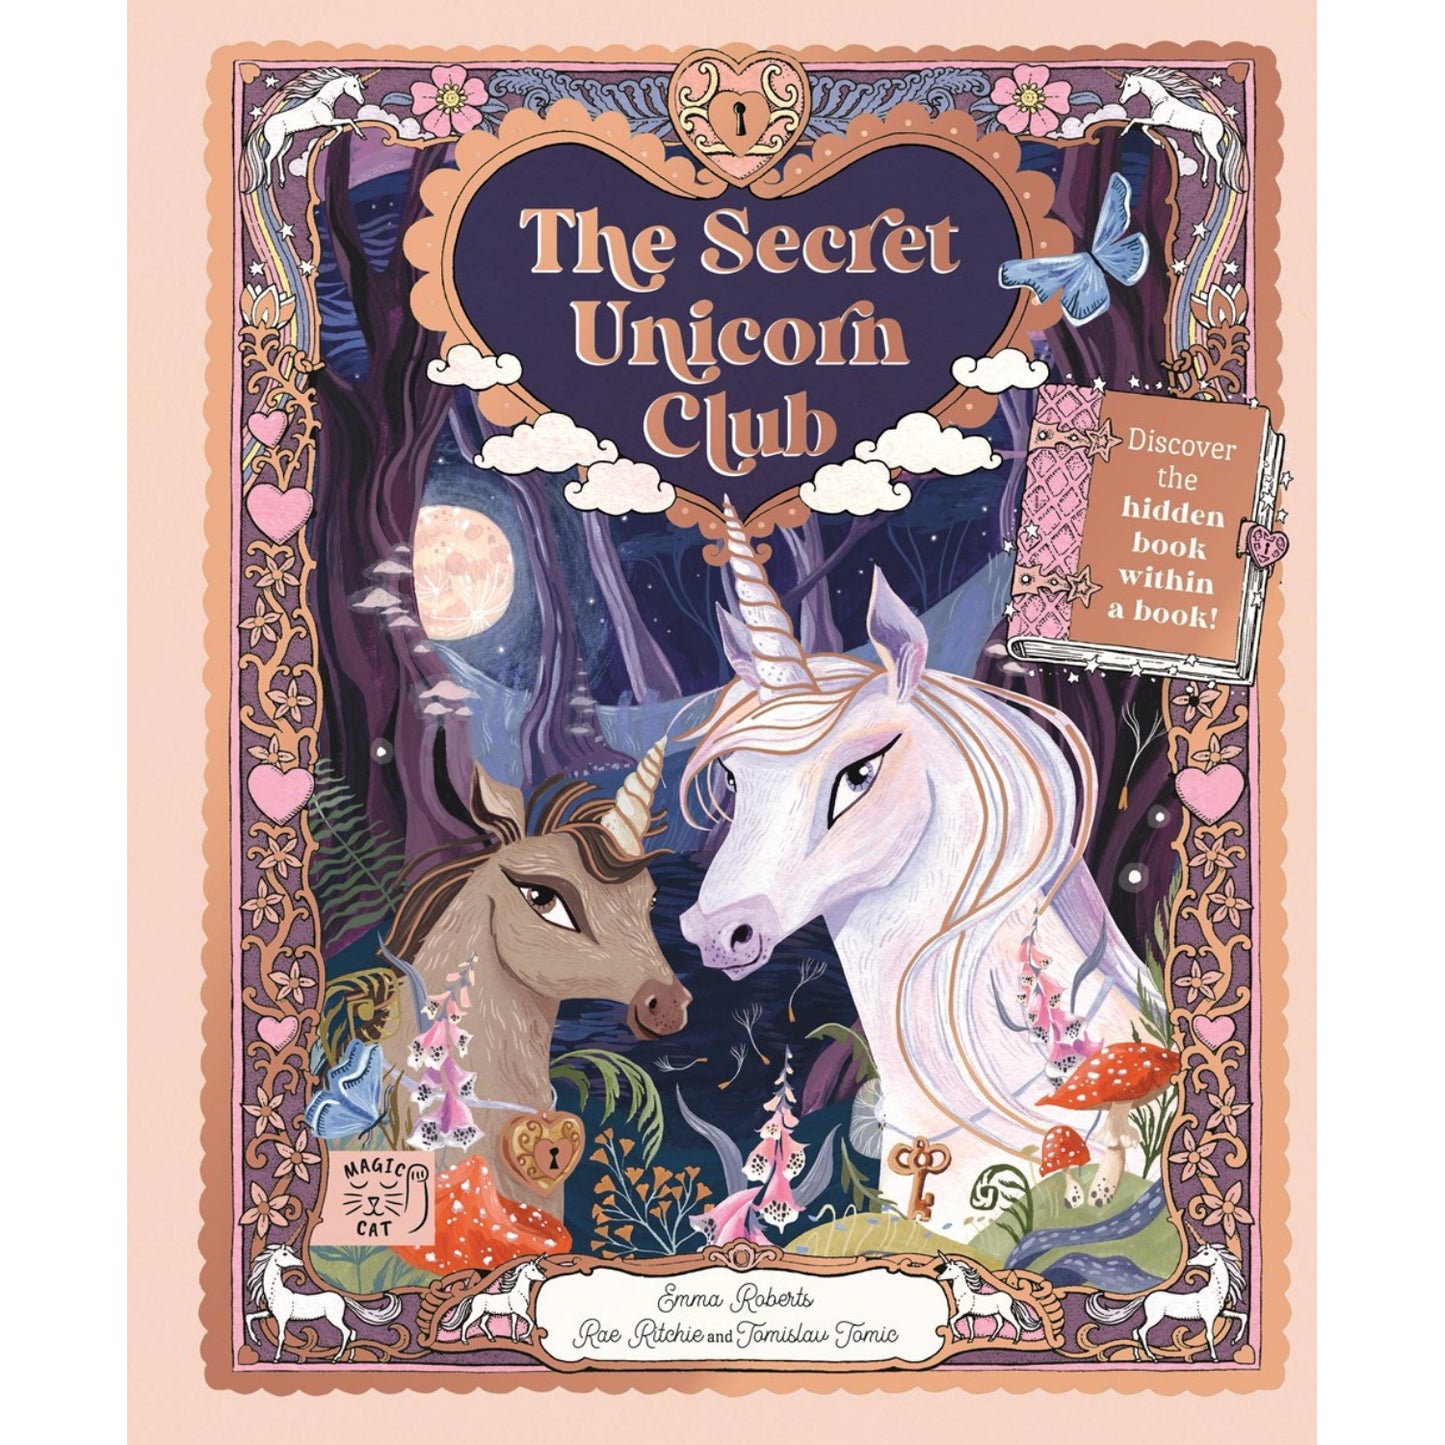 The Secret Unicorn Club - Discover the Hidden Book within a Book! | Hardcover | Children's Books